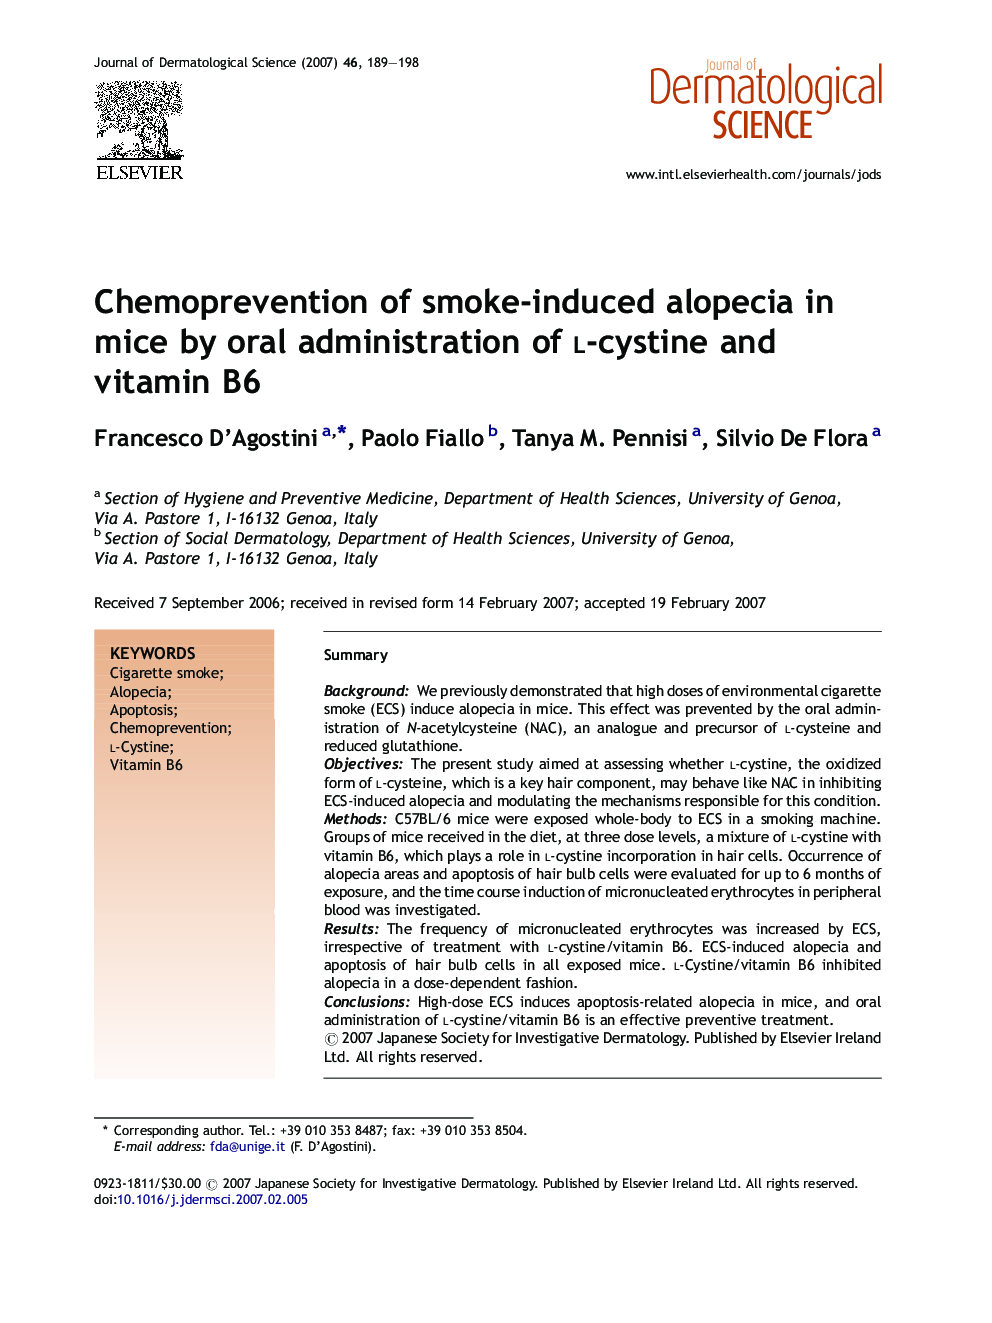 Chemoprevention of smoke-induced alopecia in mice by oral administration of l-cystine and vitamin B6